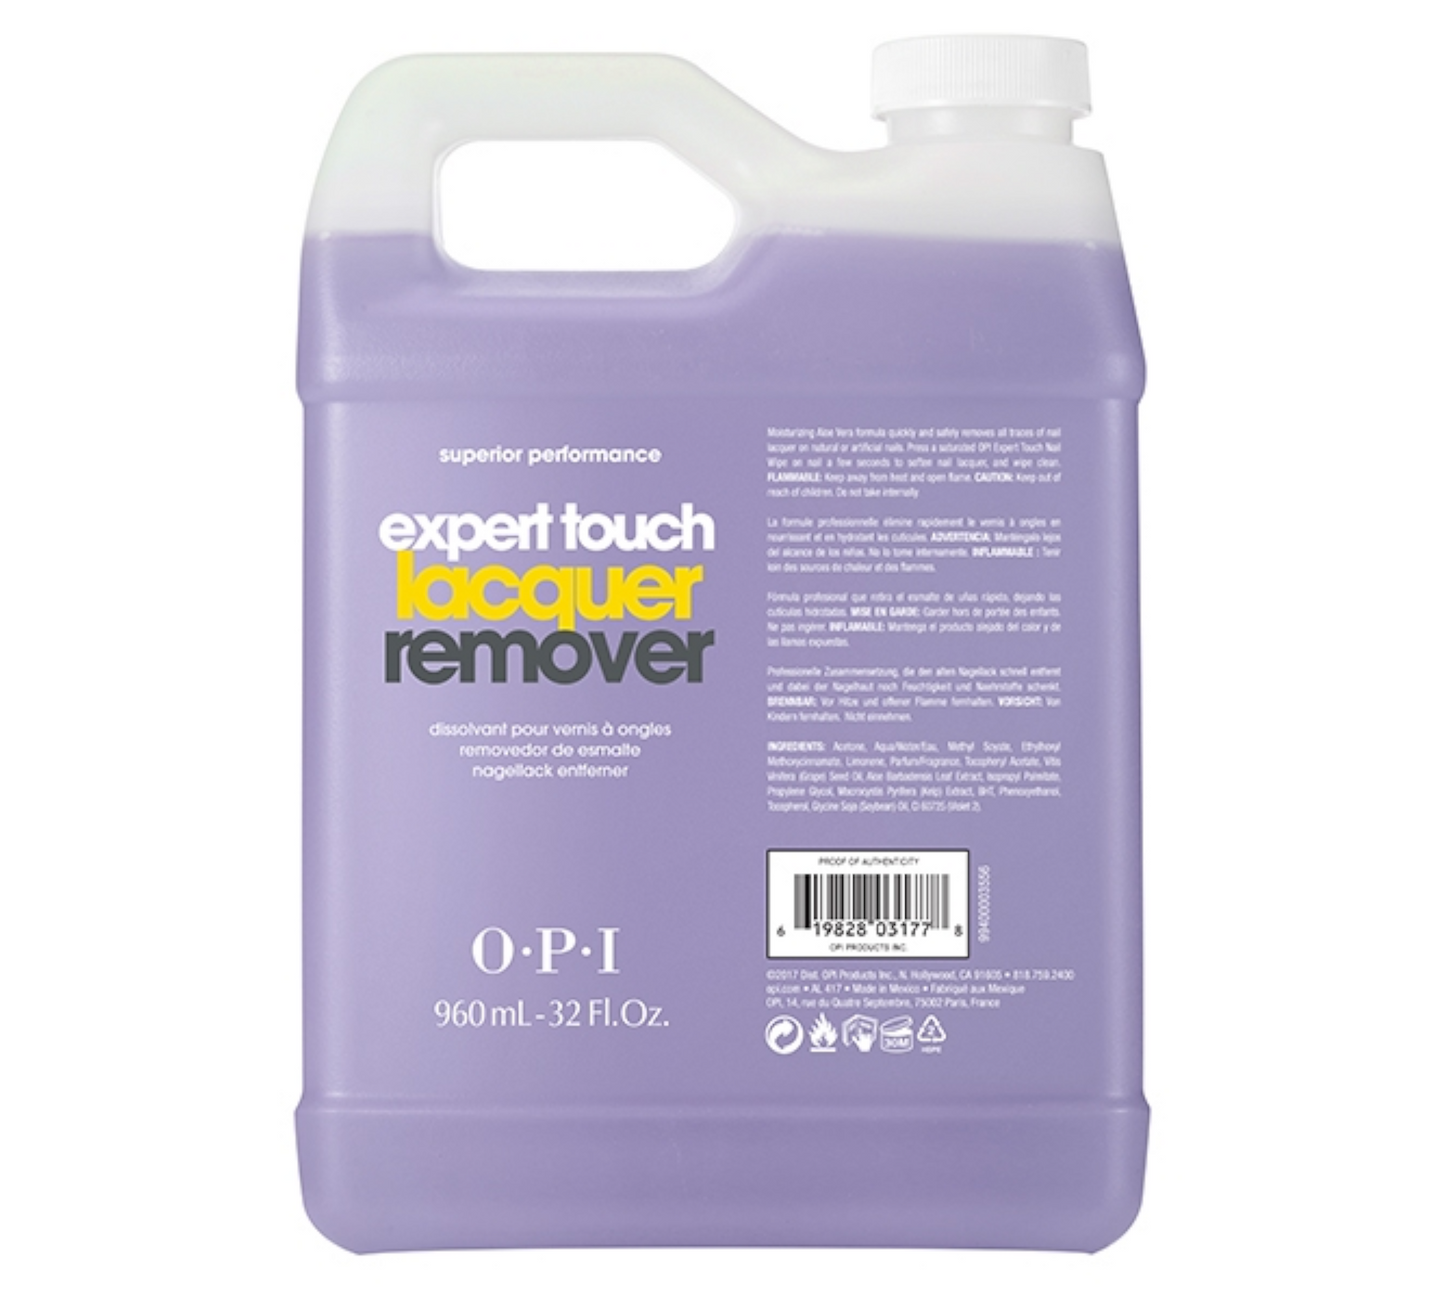 OPI Cupid Beauty Supplies Gallon / 32 Fl.Oz Nail Polish Remover OPI Expert Touch Lacquer Remover